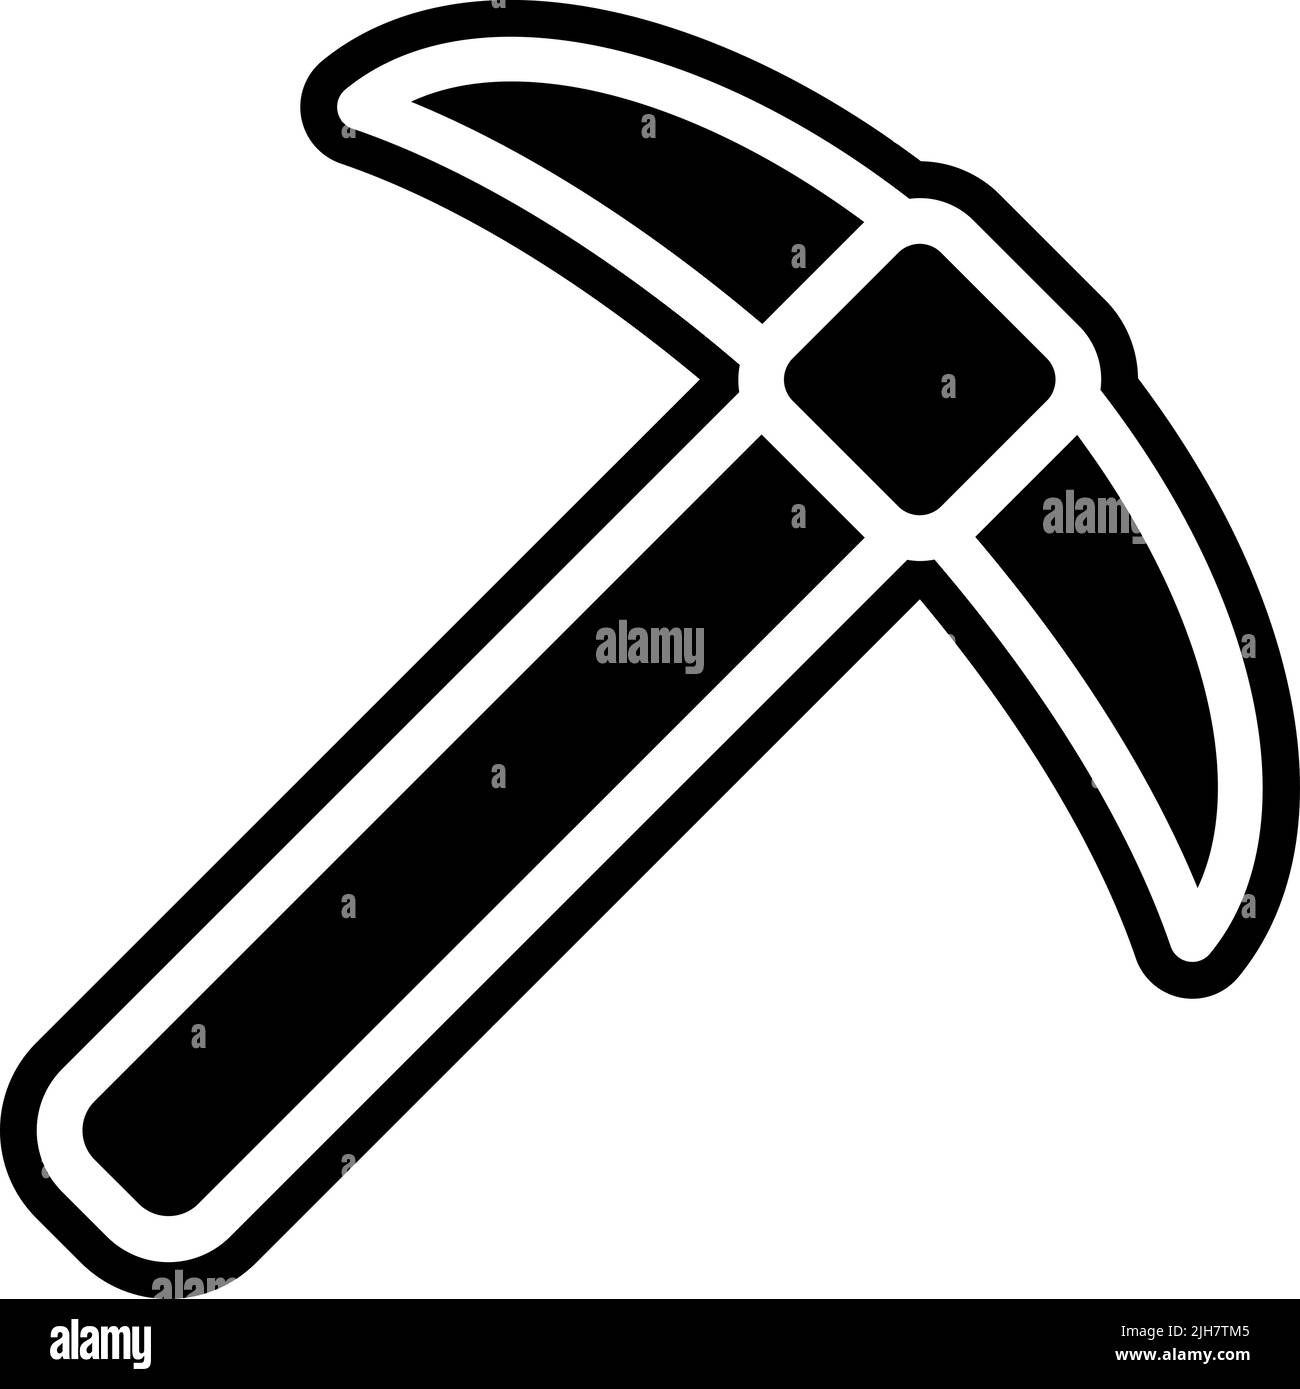 Video game elements pickaxe icon Stock Vector